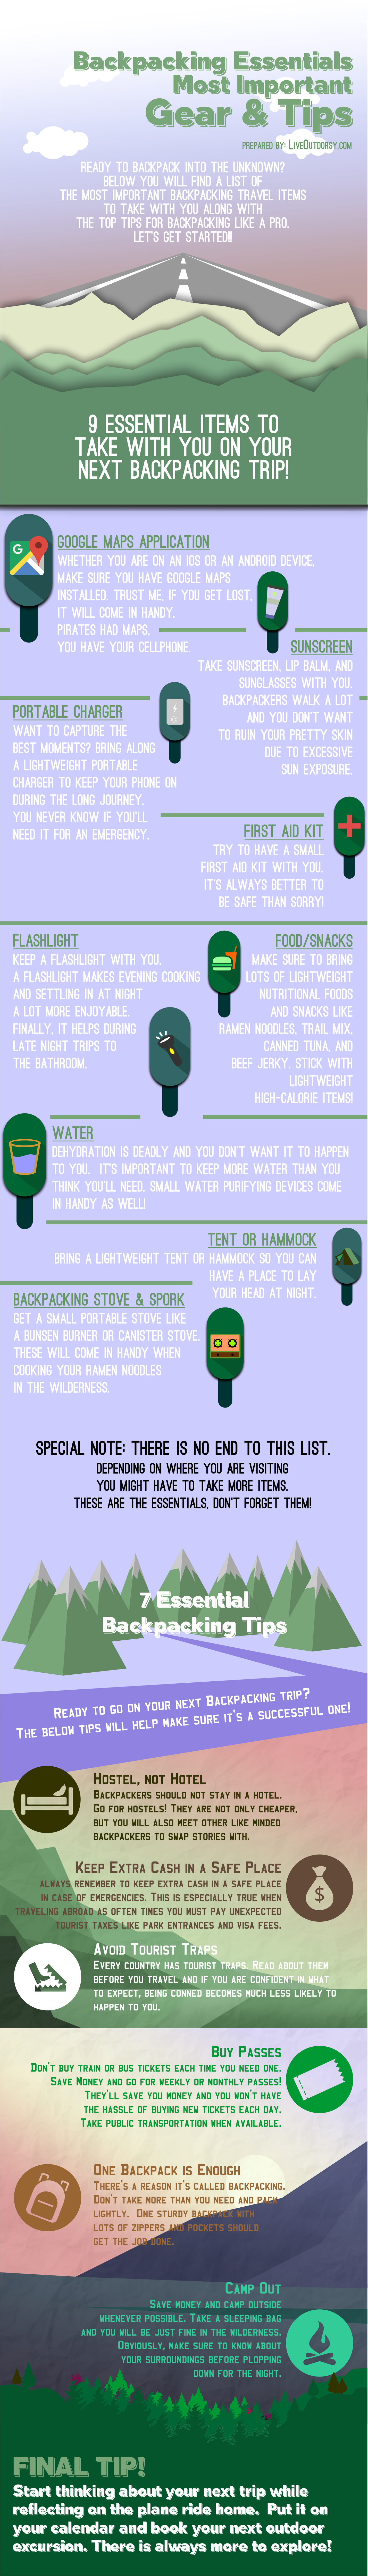 backpacker-checklist-must-haves-for-sleep-outdoors